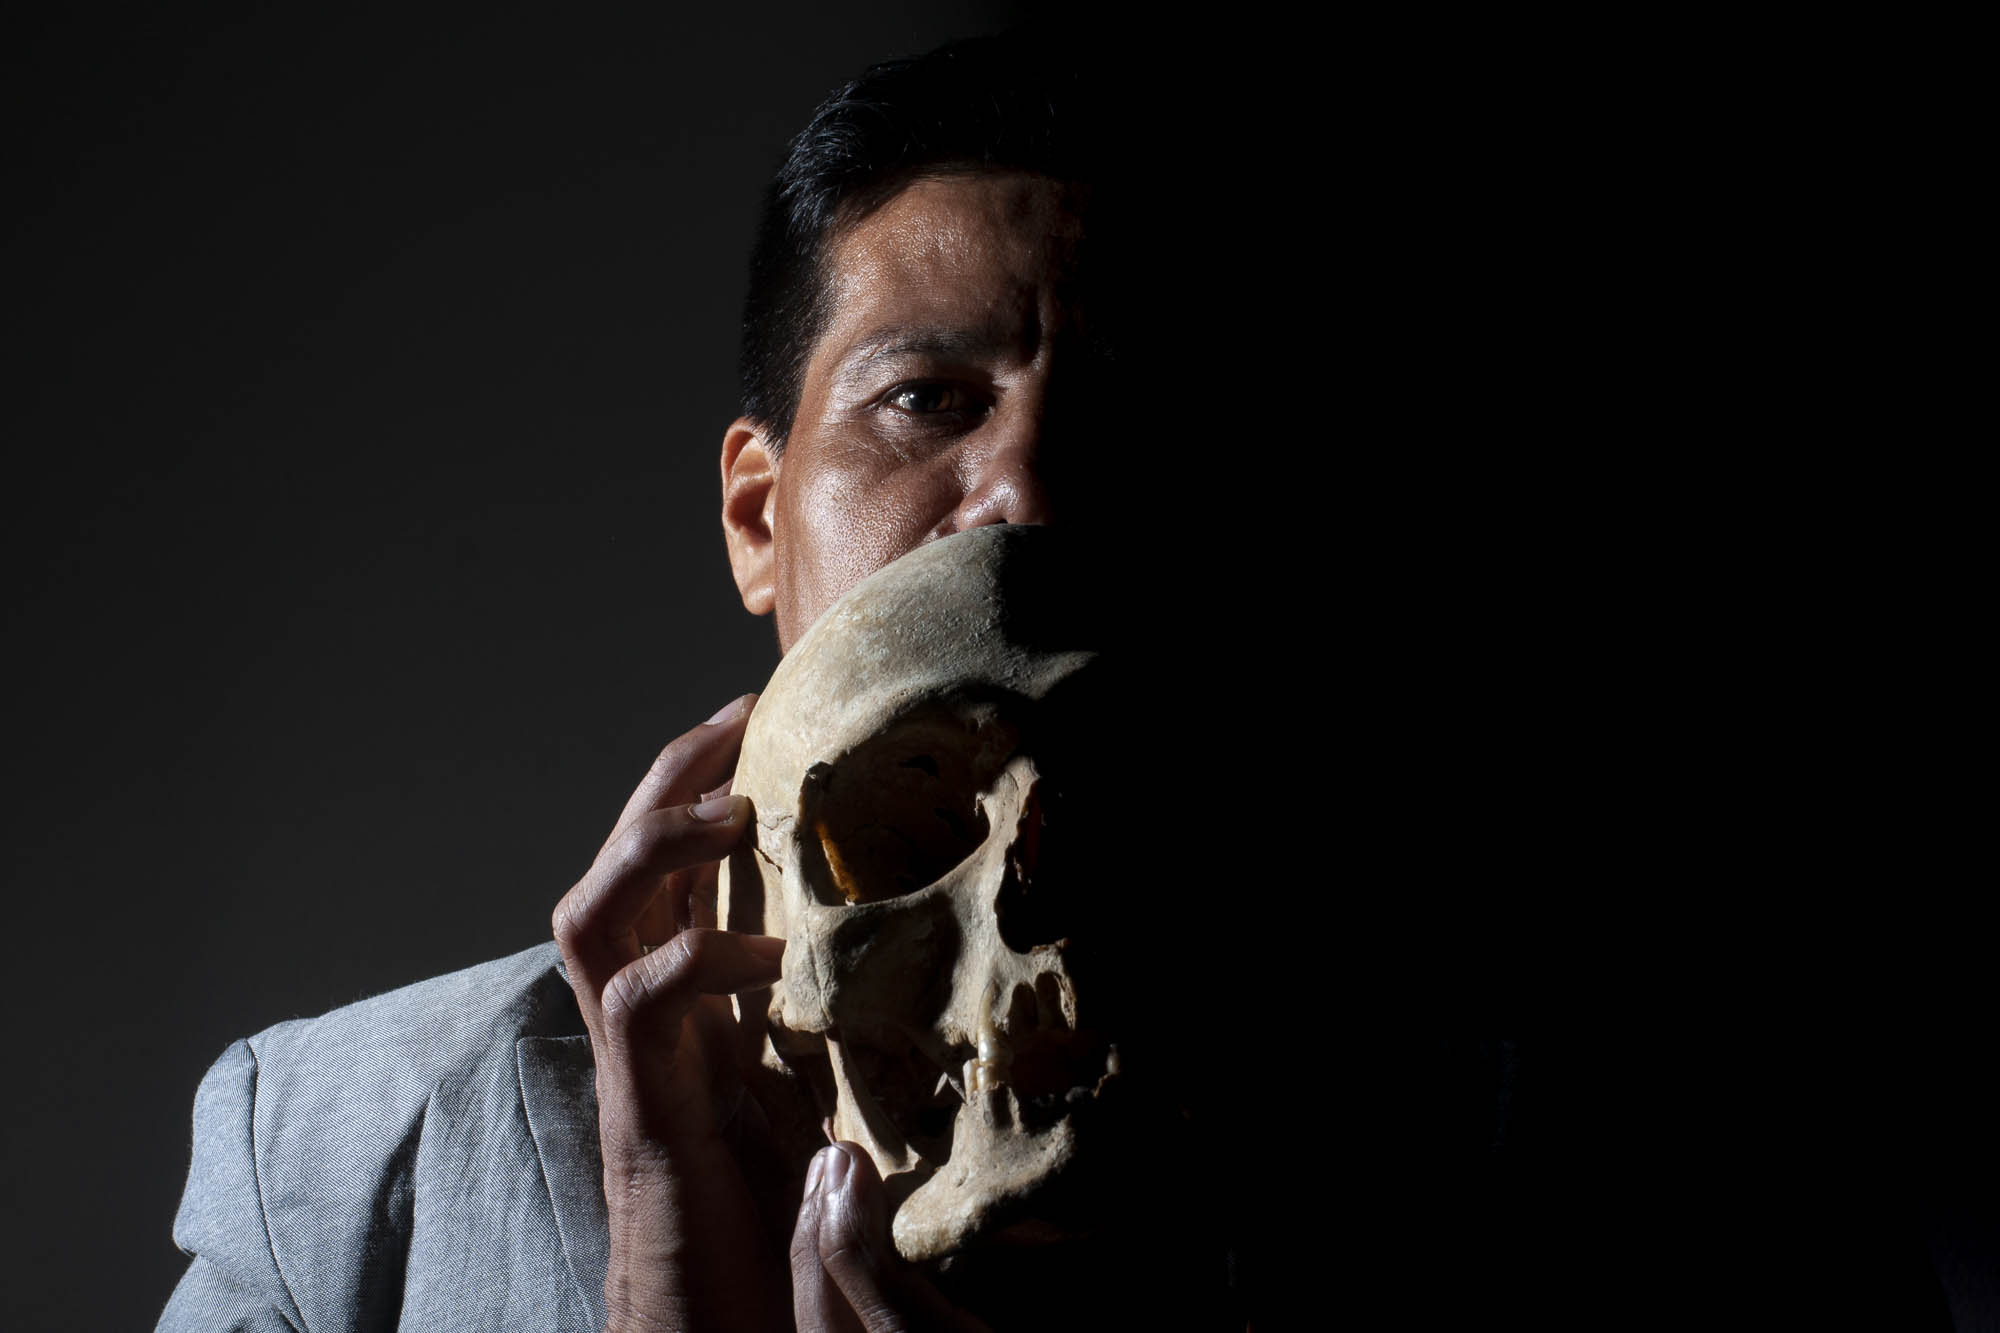  Israel poses for a portrait. He uses a human skull to conceal his identity. 